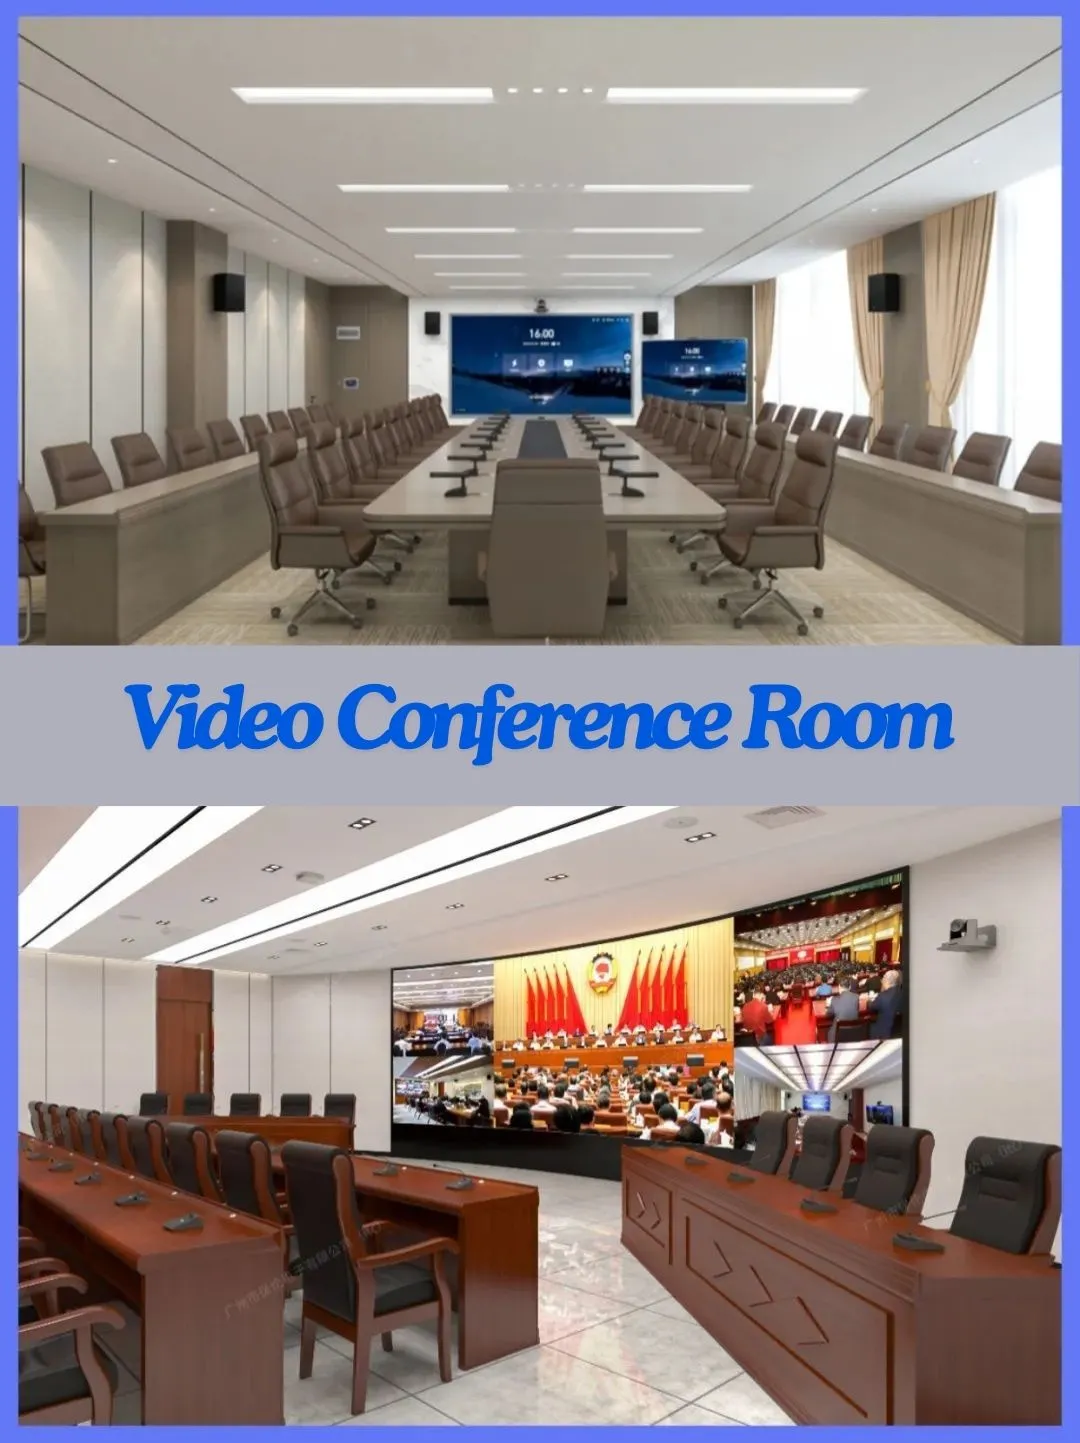 Remote Video Conference Room